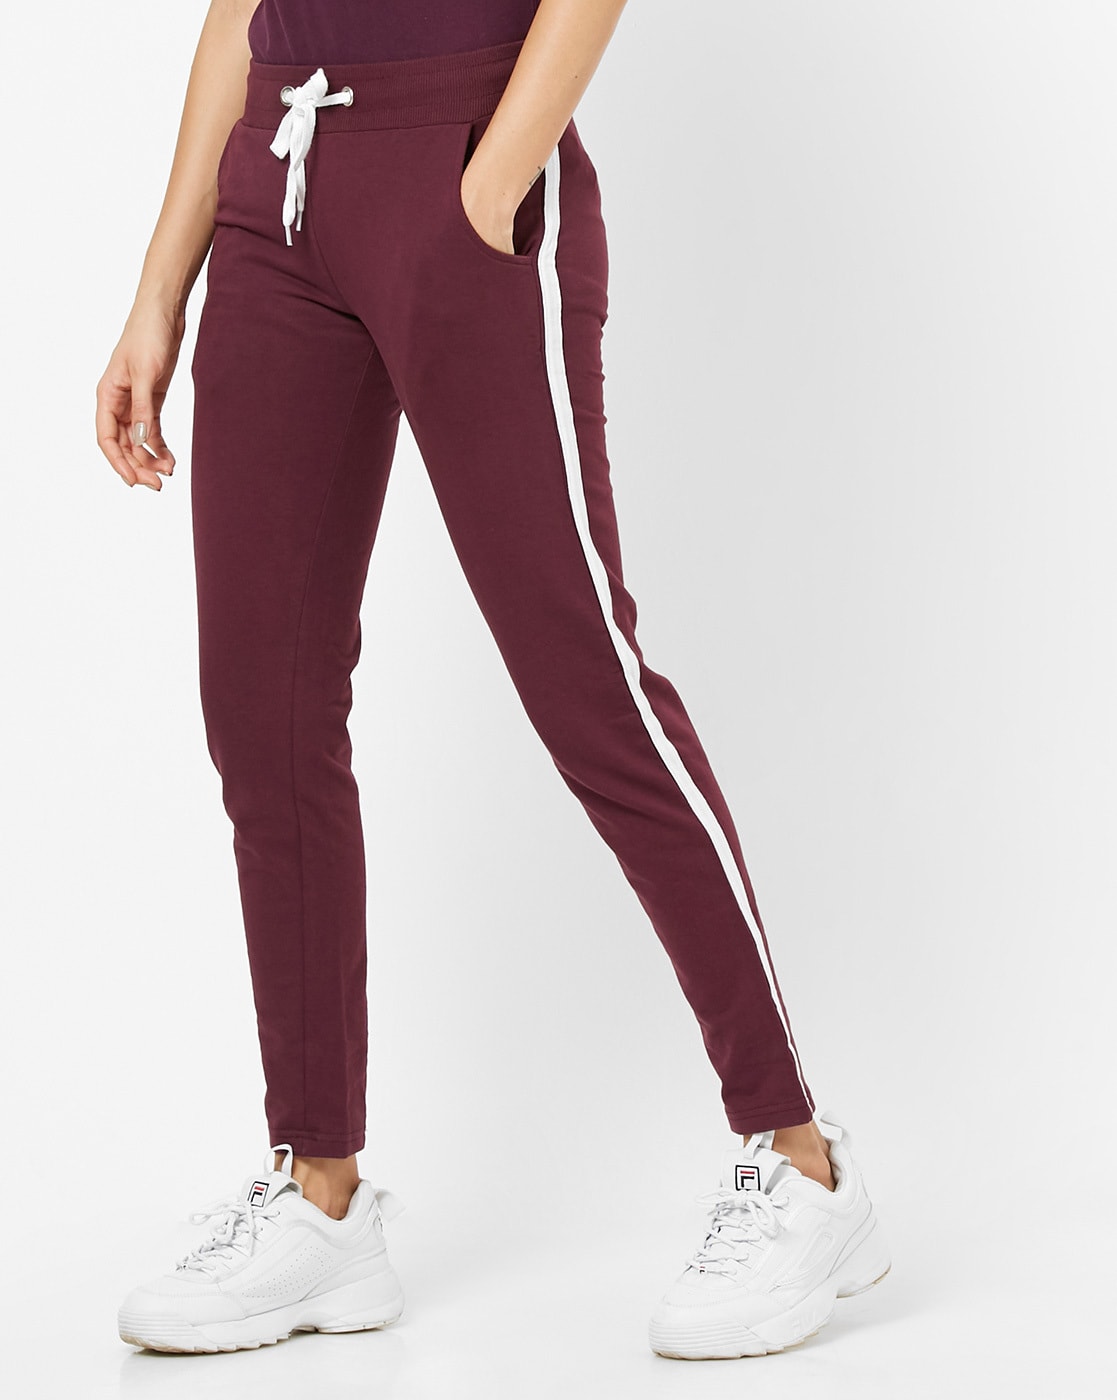 Ladies Track Pants Pattern  Checked Plain Printed at Rs 50  Piece in  Tirupur